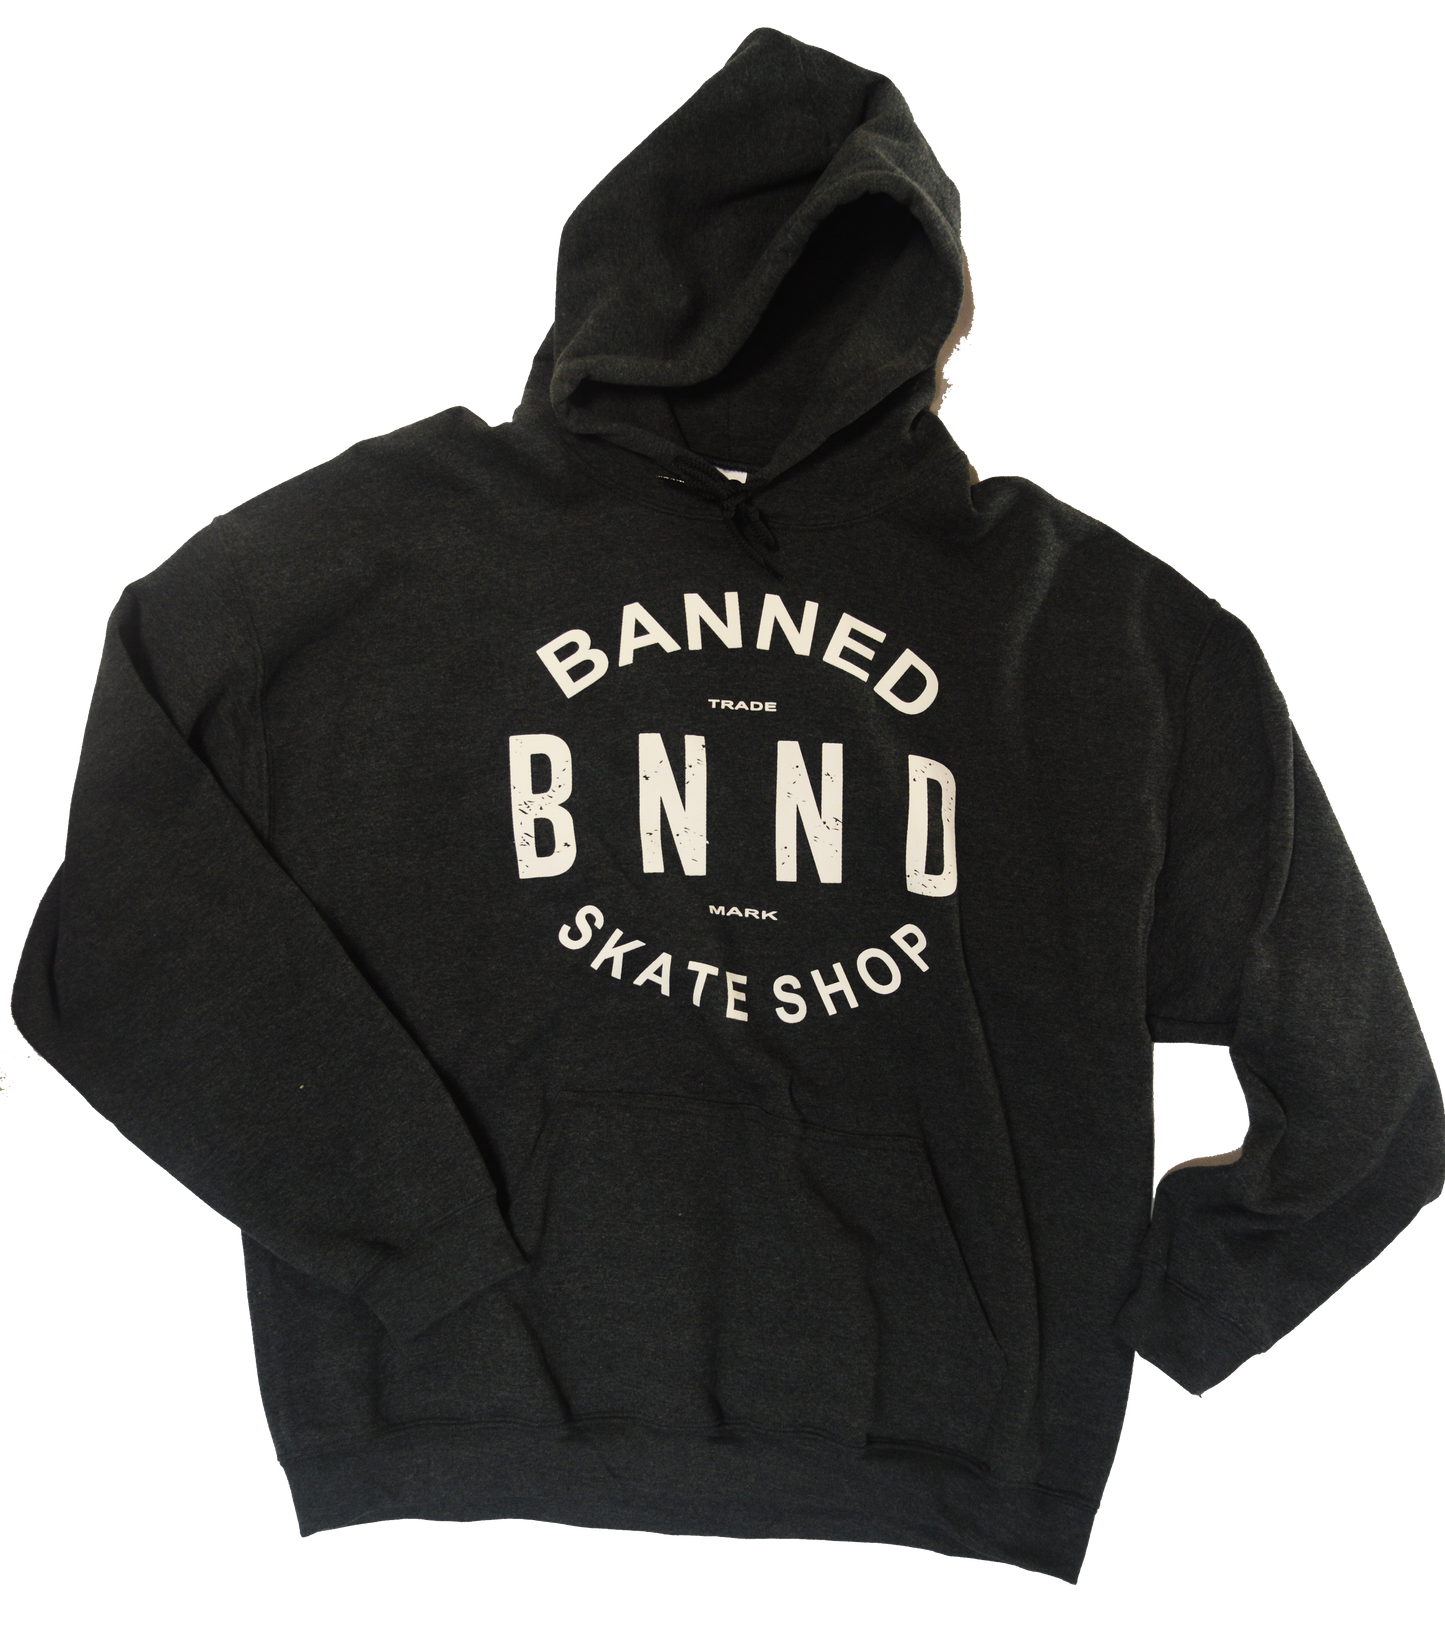 BANNED (BNND) Sweater